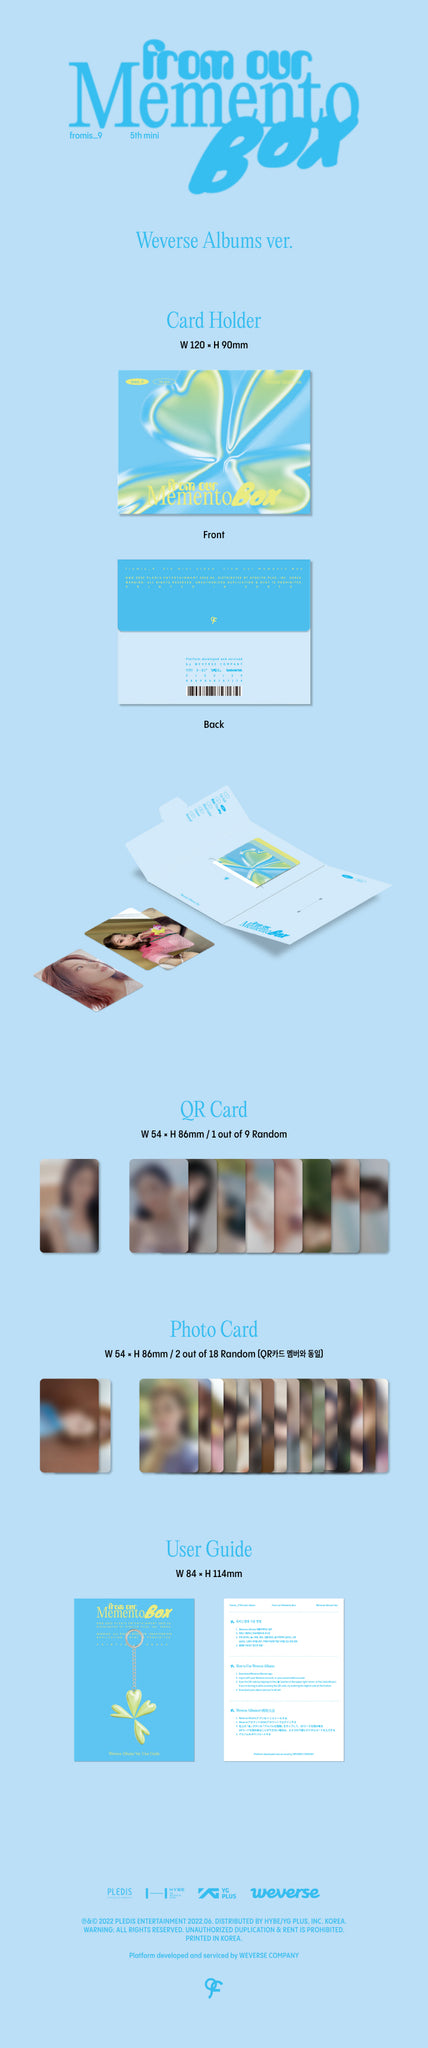 fromis_9 - from our Memento Box (Weverse Albums ver)